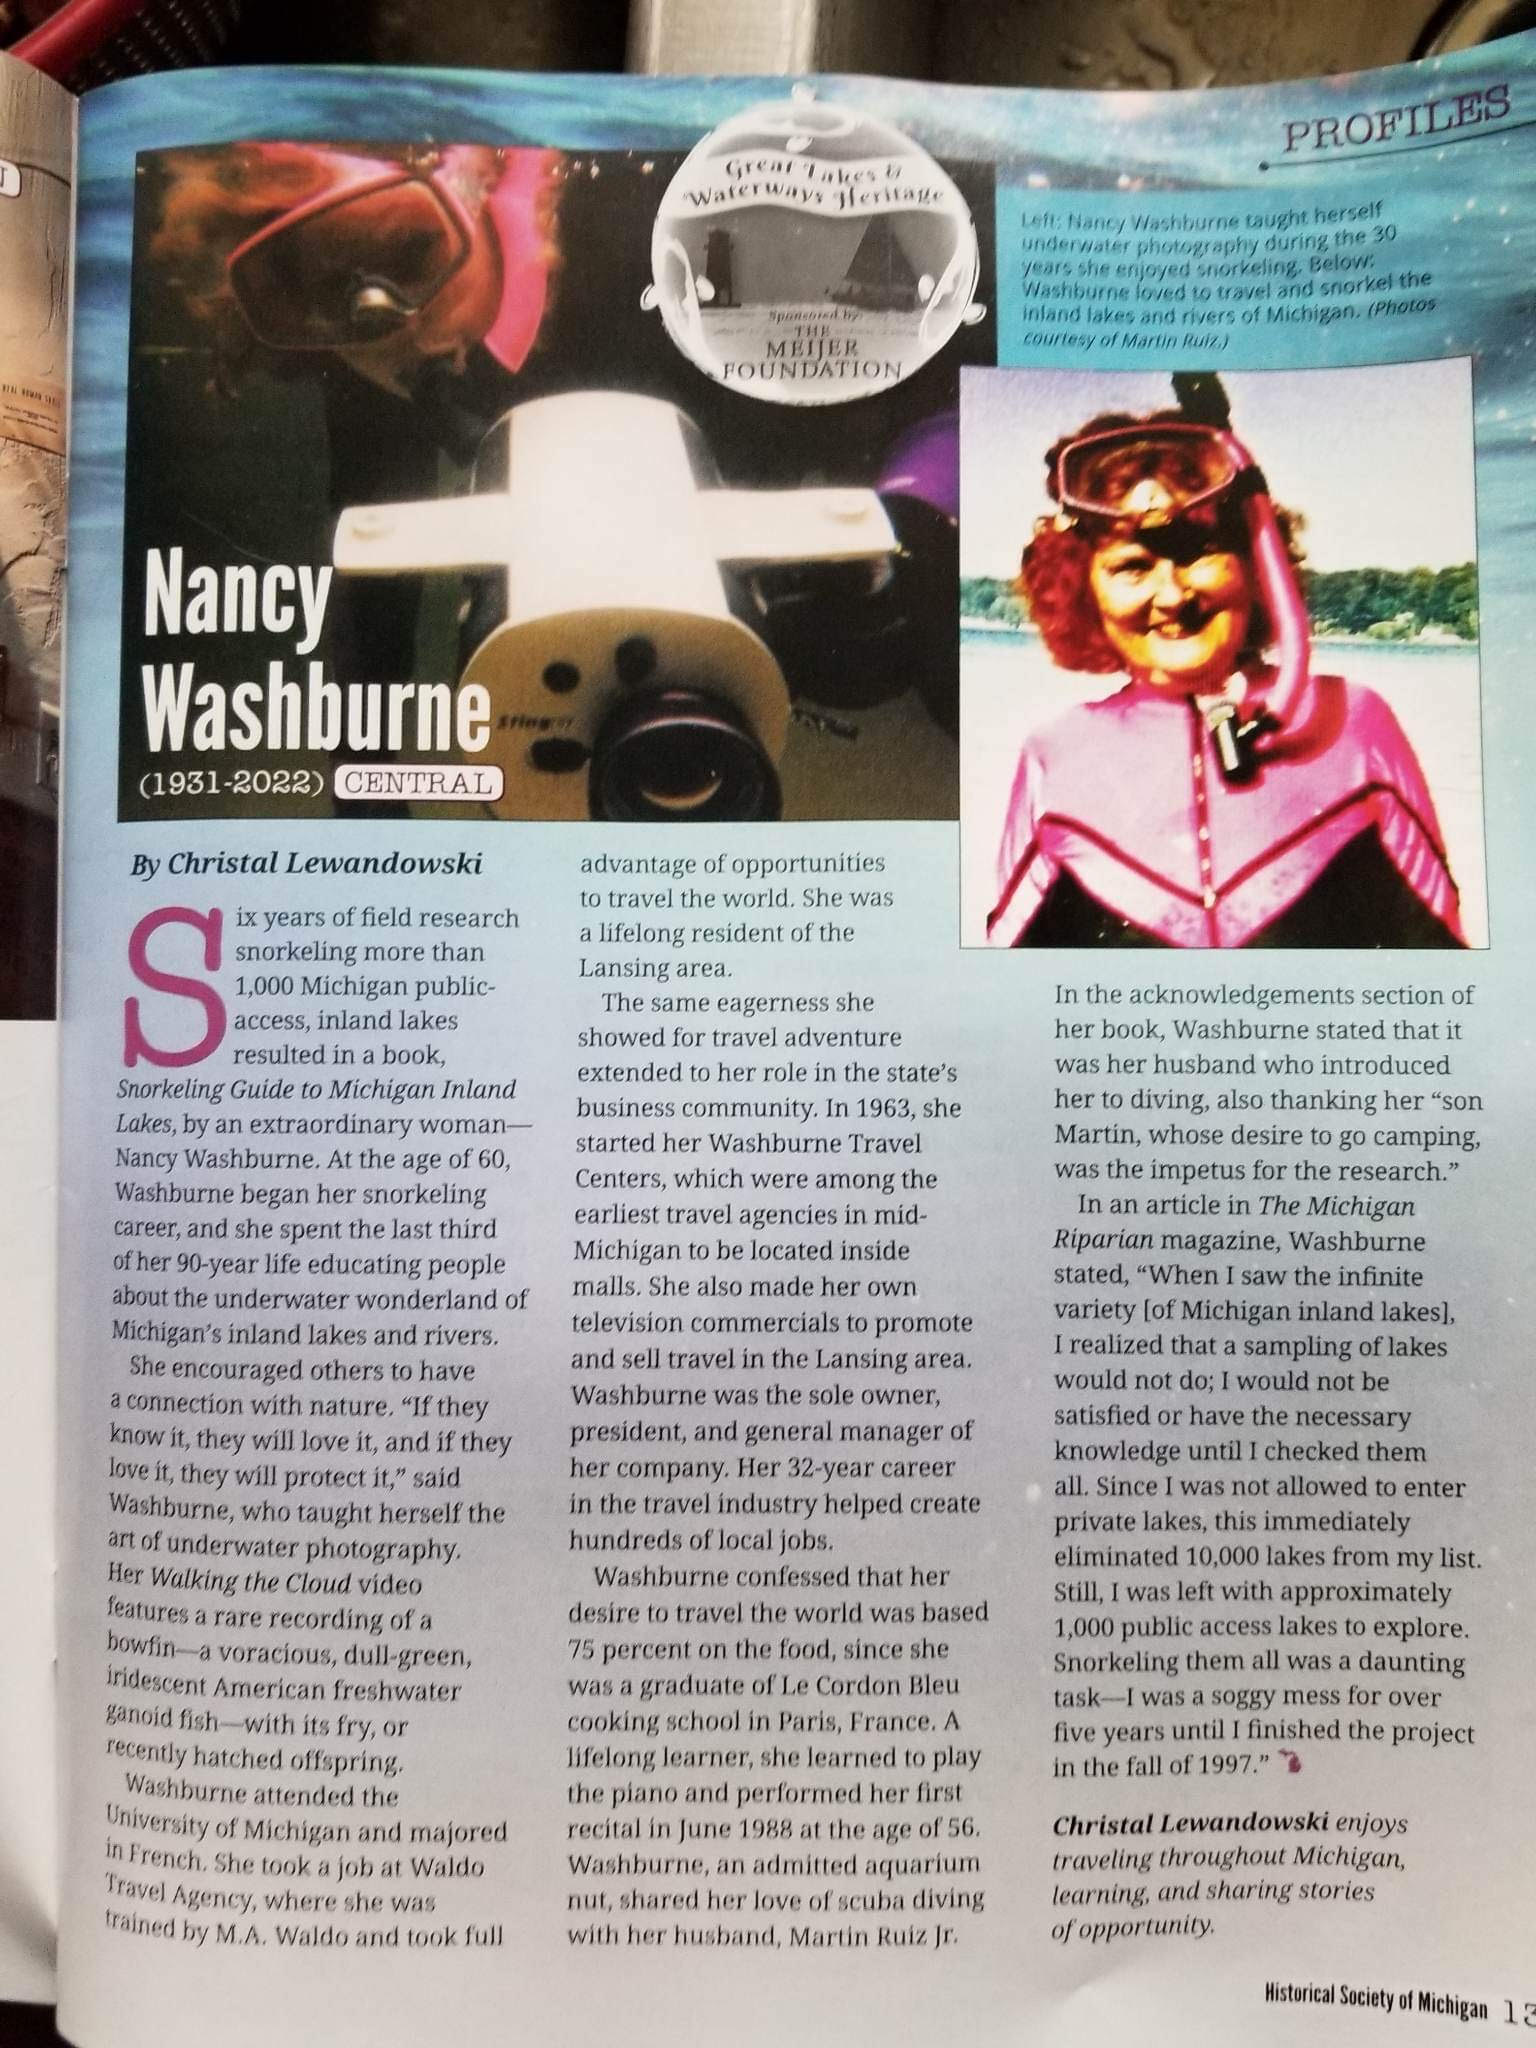 Michigan History, the magazine of the Historical Society of Michigan, is honoring the legacy of Nancy Washburne, the Pioneer of Freshwater Disco...